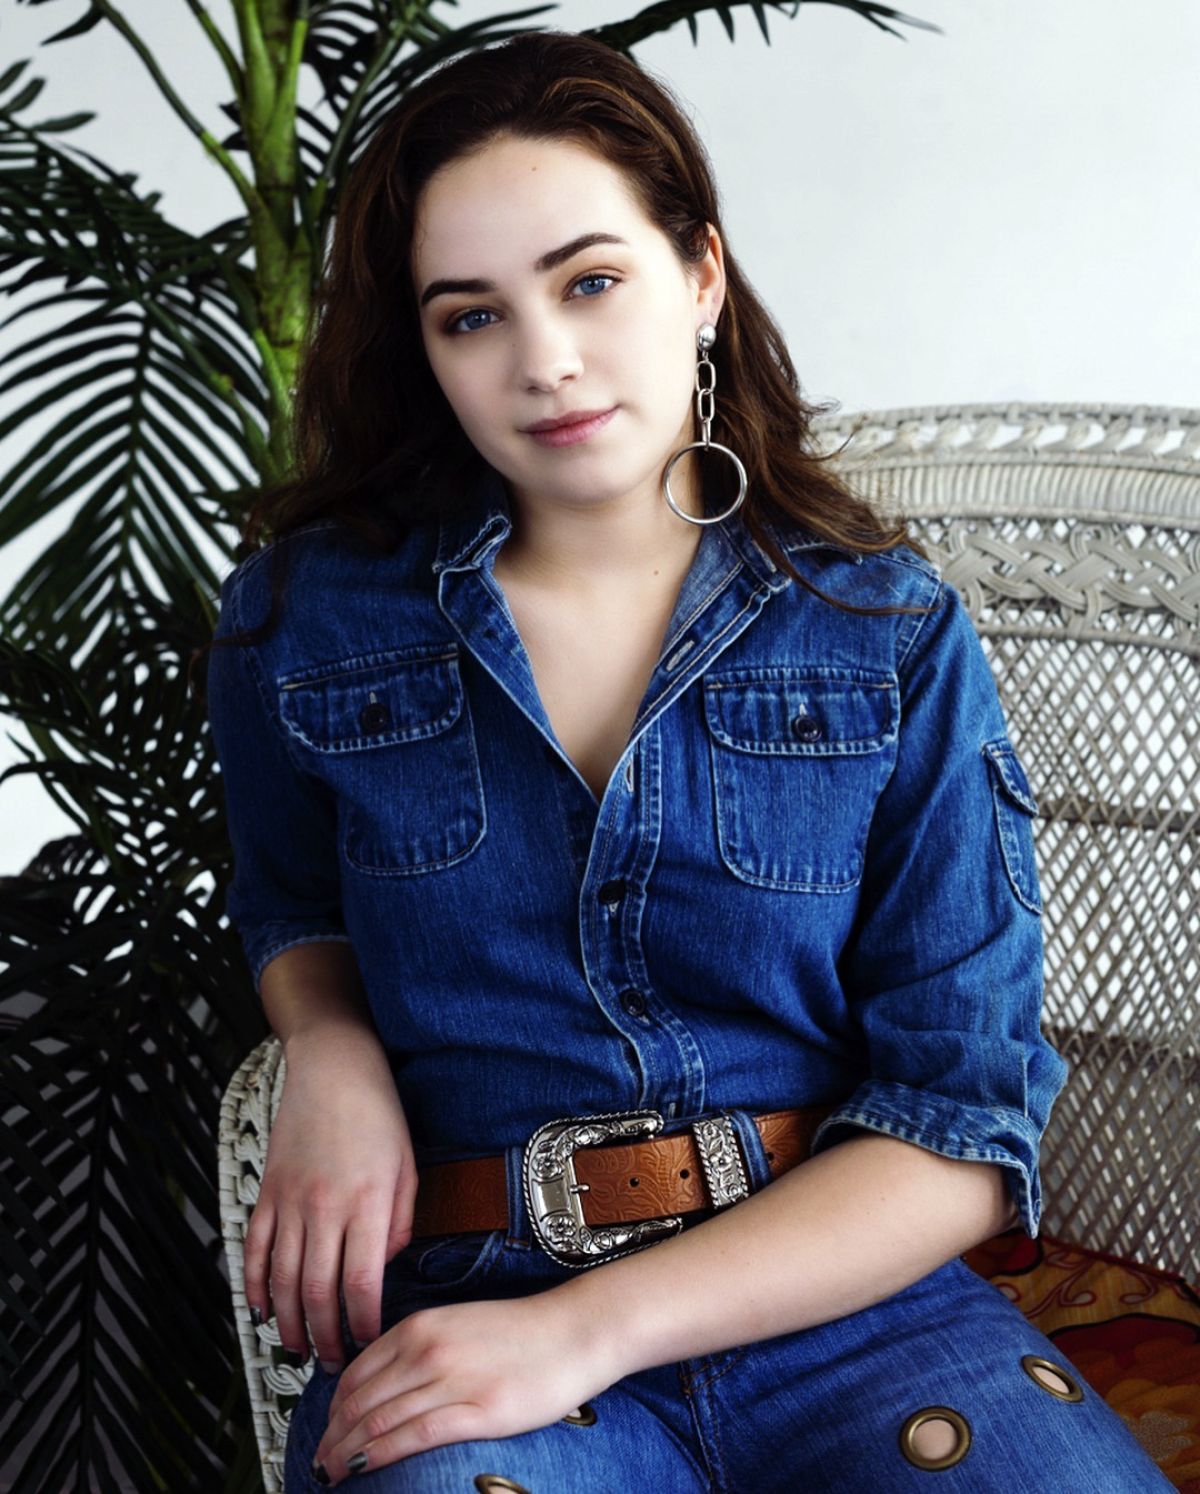 MARY MOUSER in Avante Magazine, July 2018.